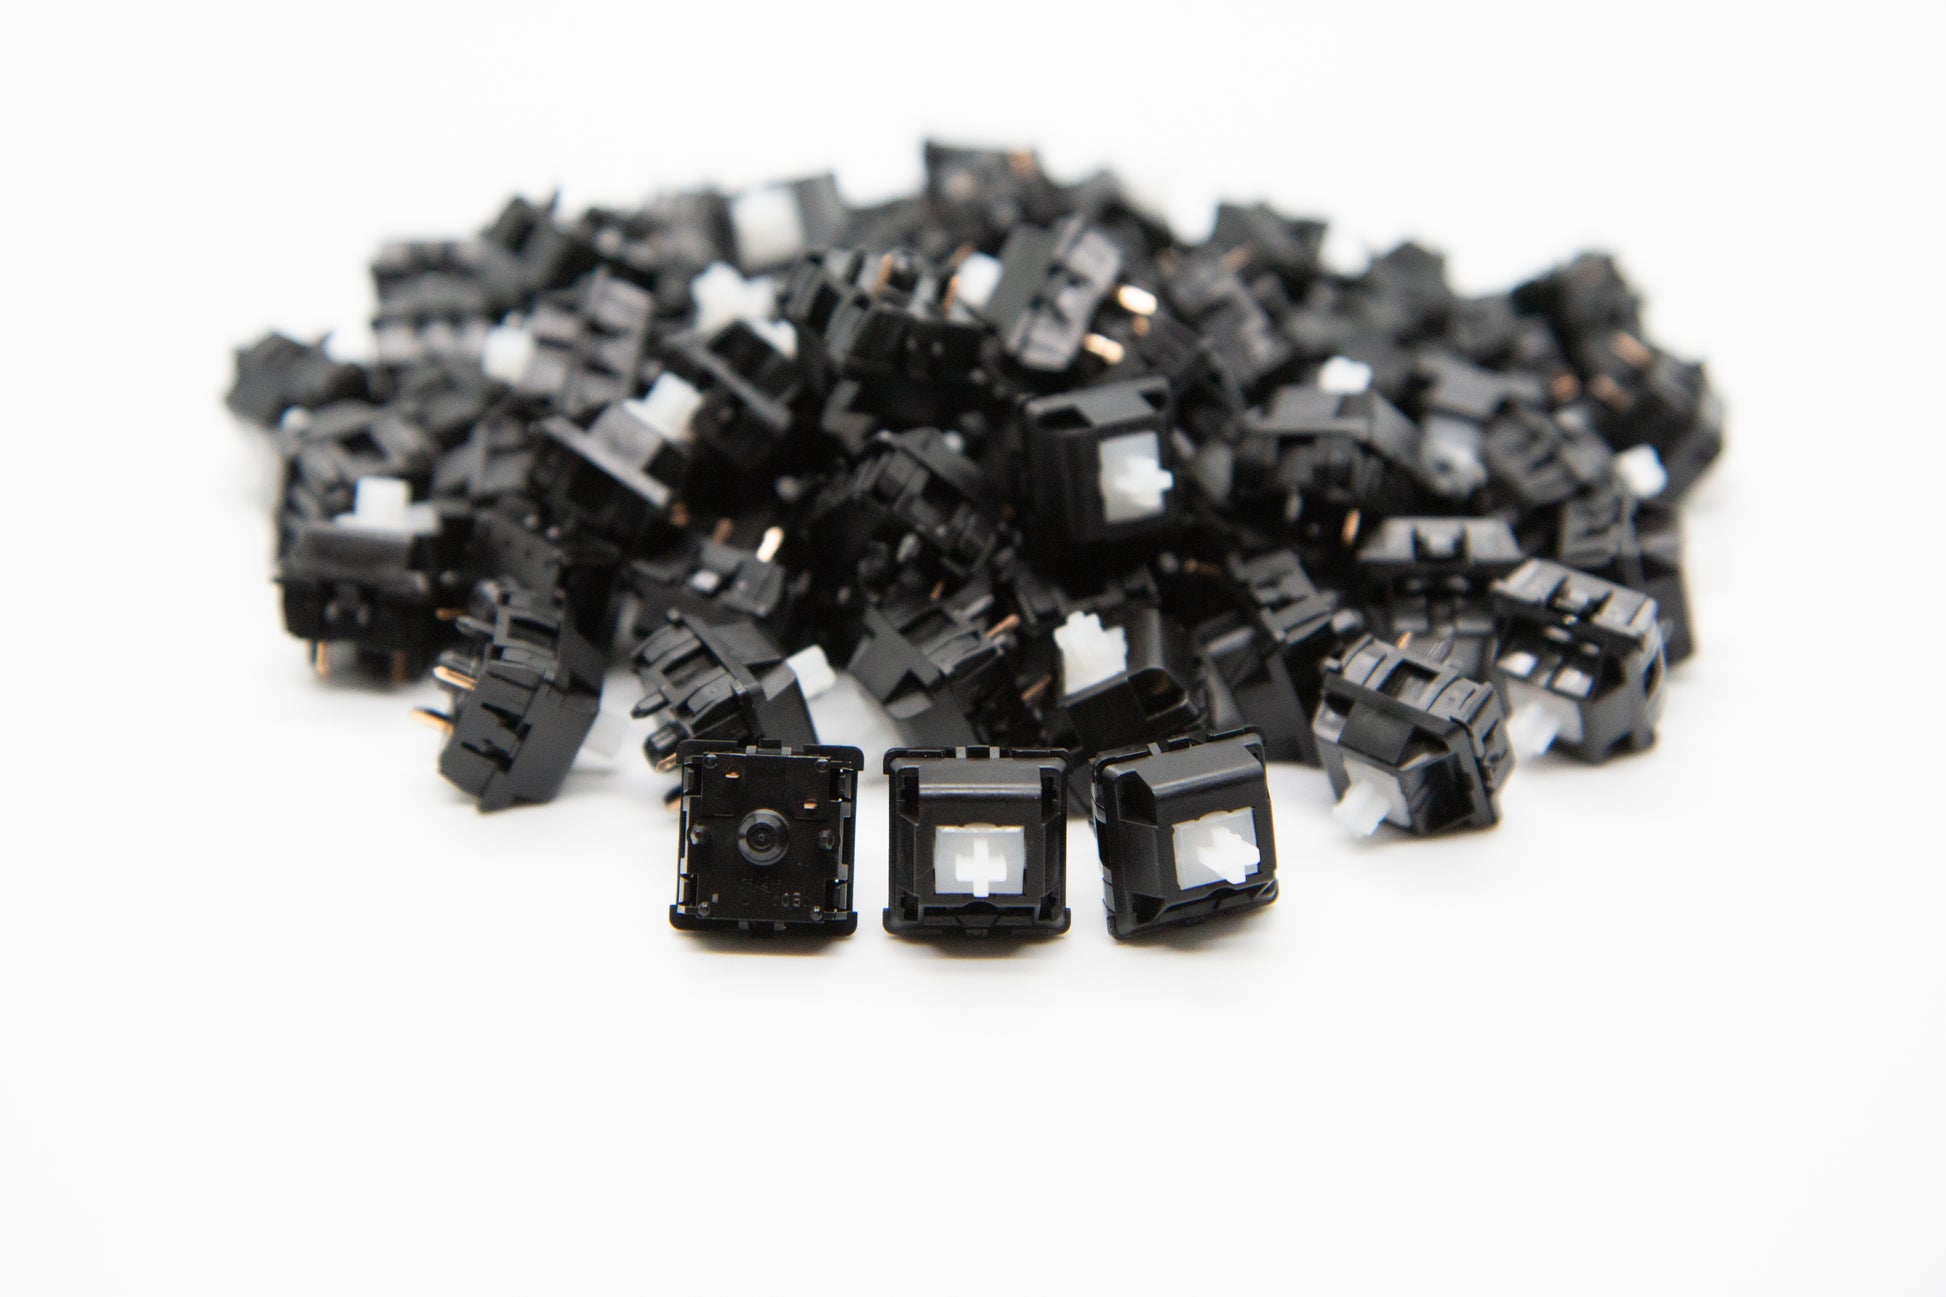 Close-up shot of a pile of Pom Linear mechanical keyboard switches featuring black housing and clear, white stems